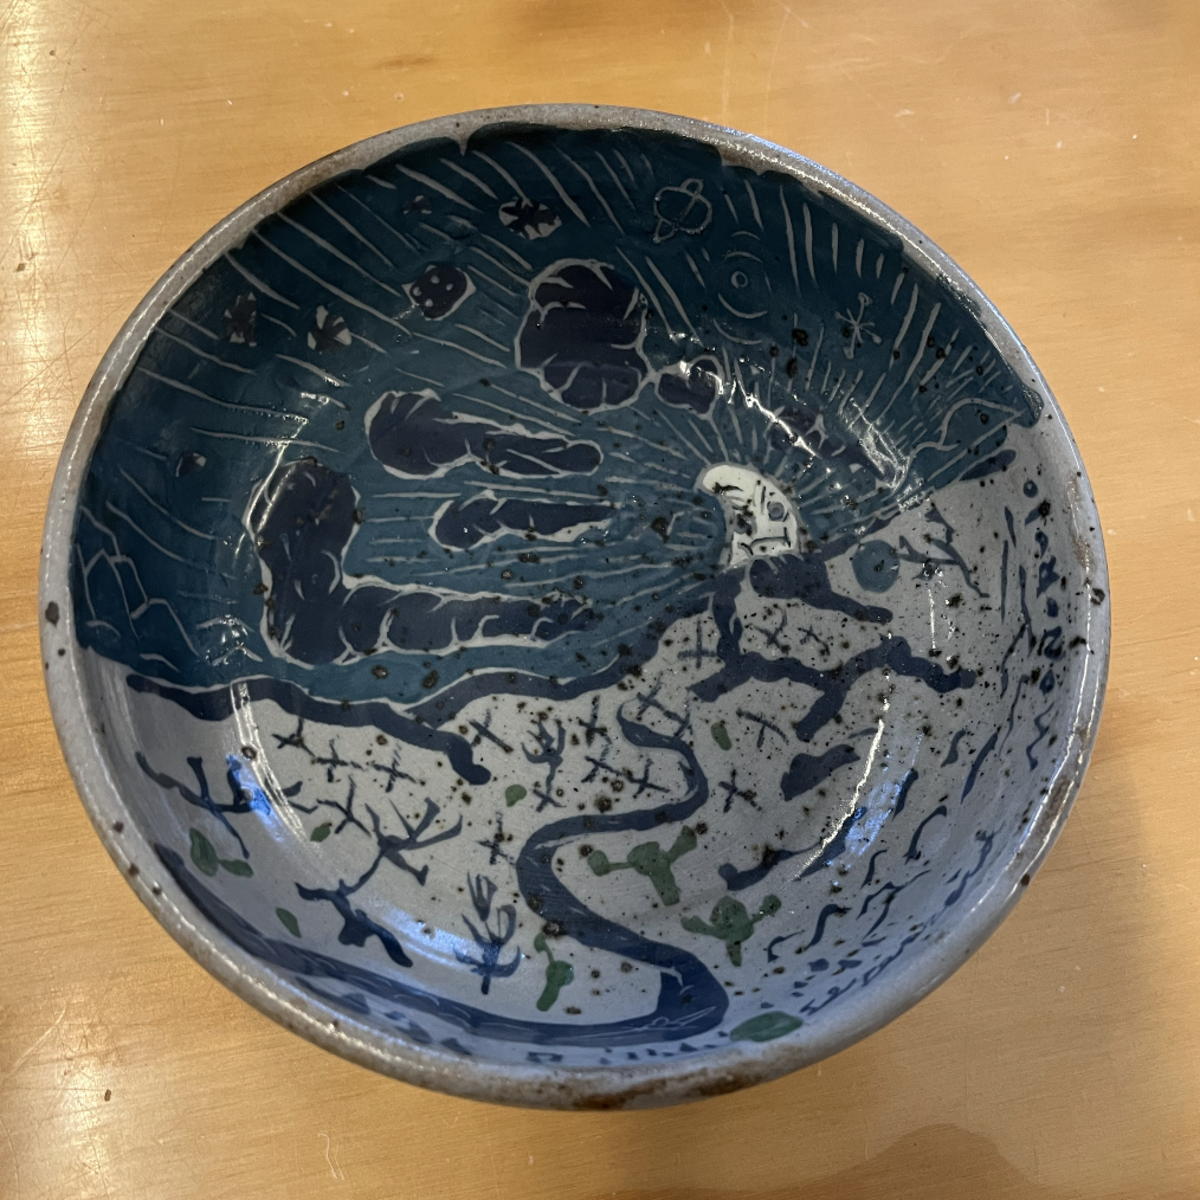 Blue and gray landscape bowl